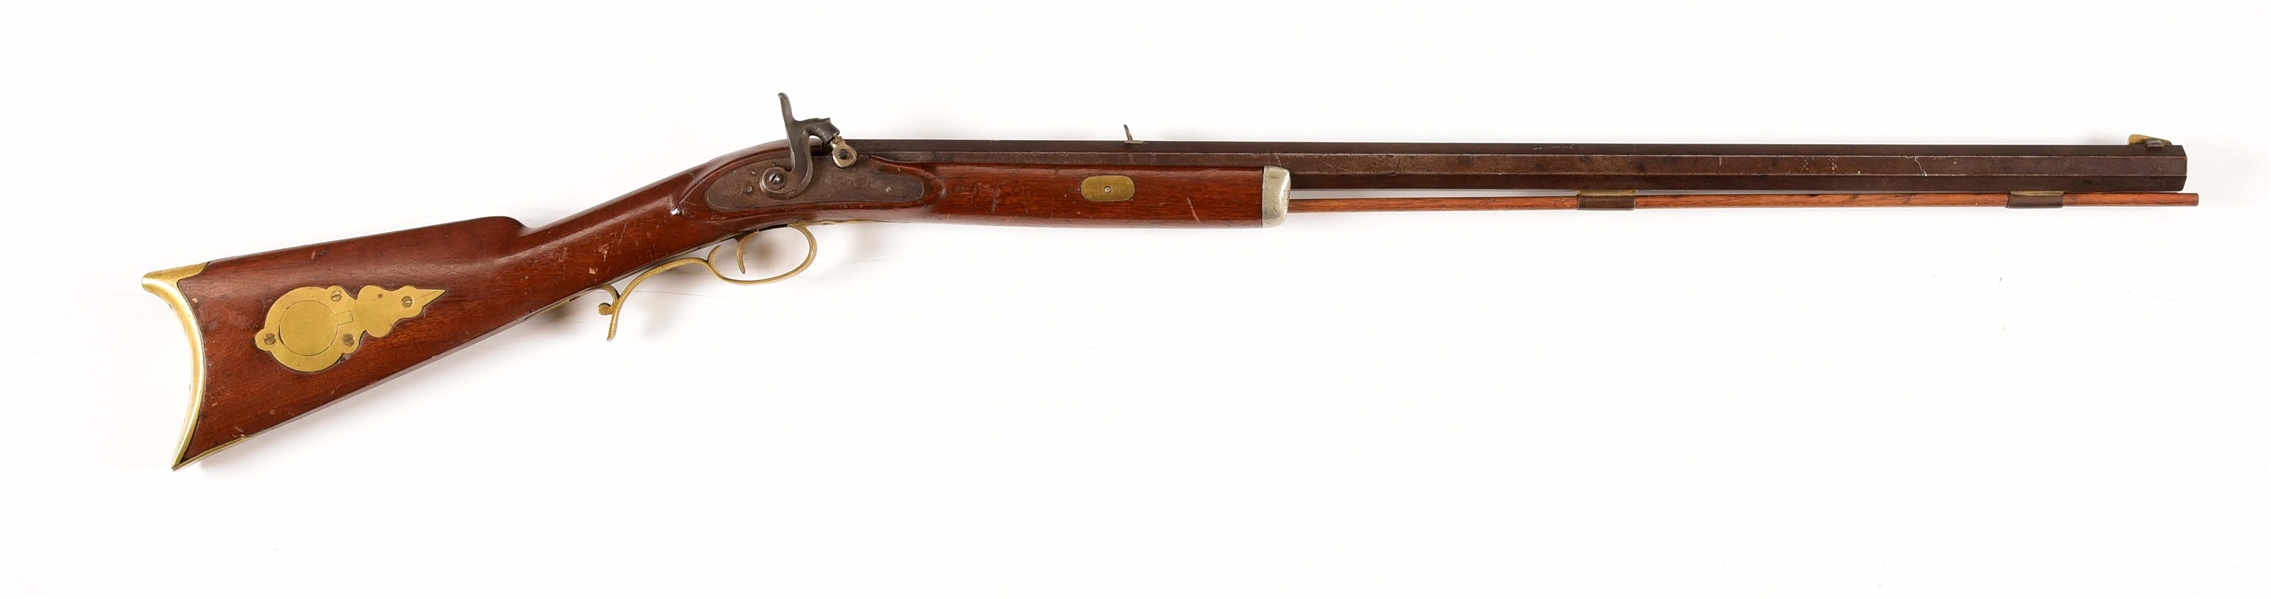 (A) J. GURD & SONS PERCUSSION RIFLE WITH REMINGTON MARKED BARREL.